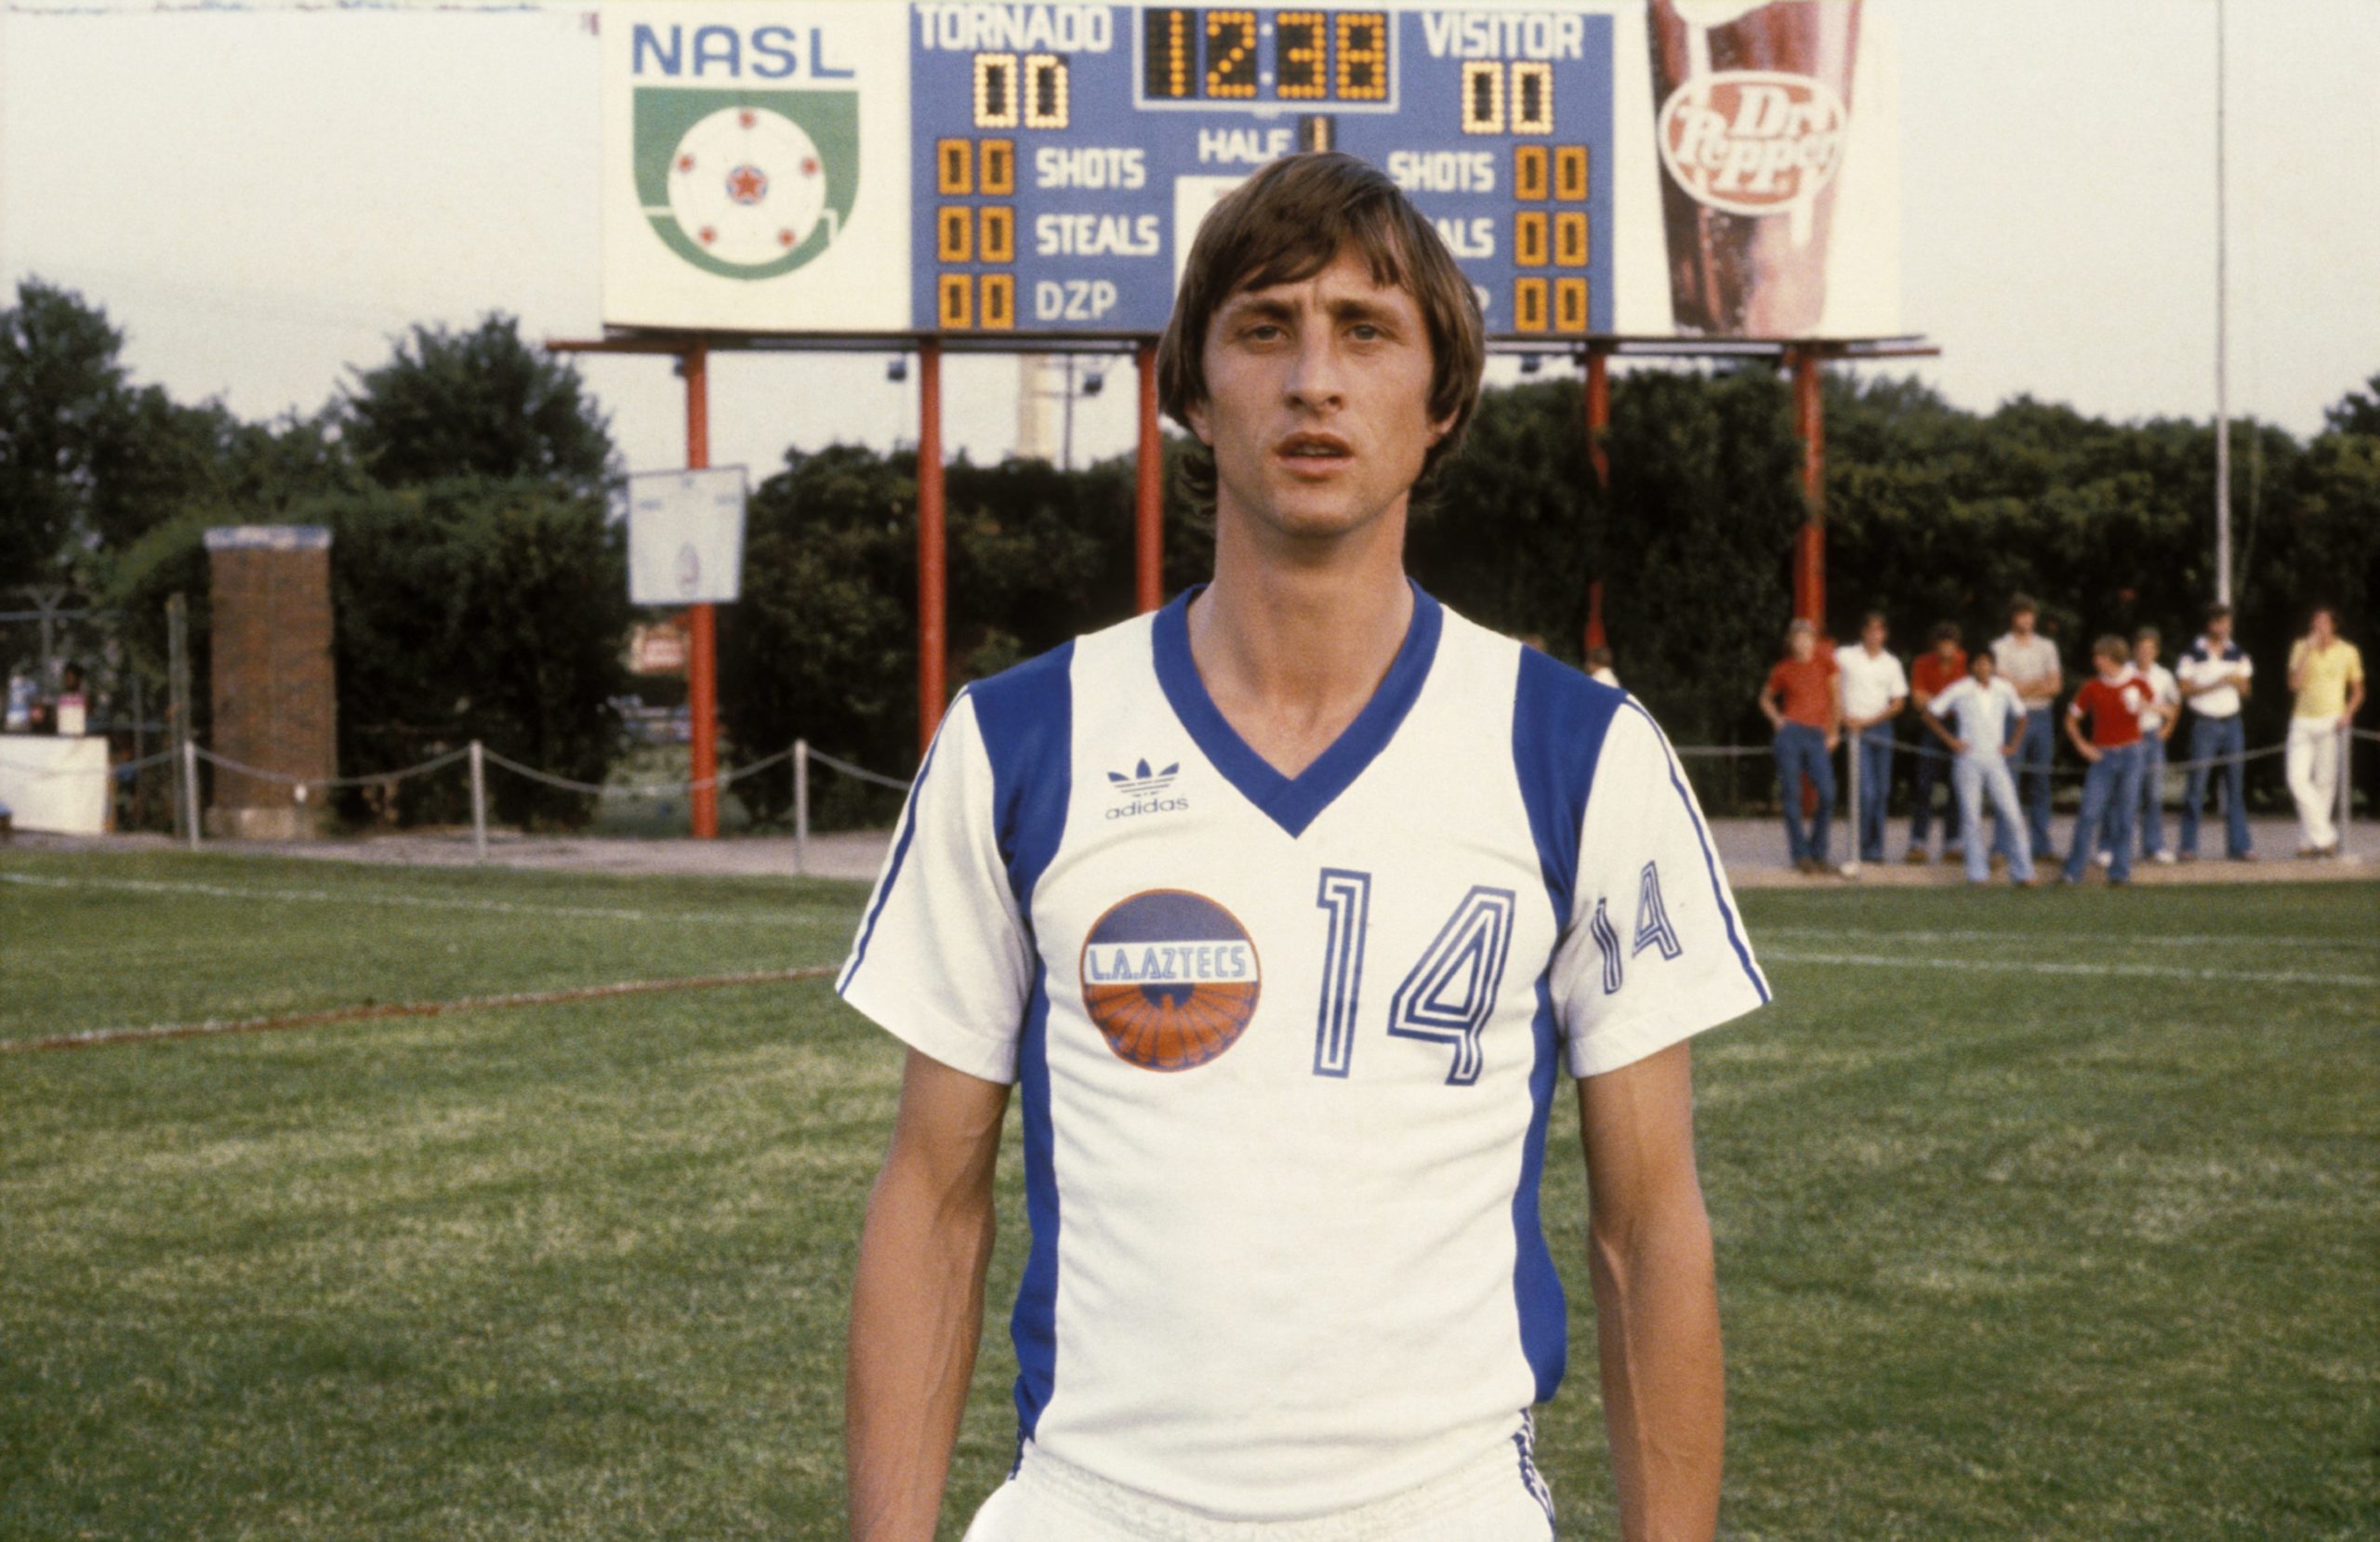 Johan Cruyff during his time at the L.A. Aztecs, America - 1979.